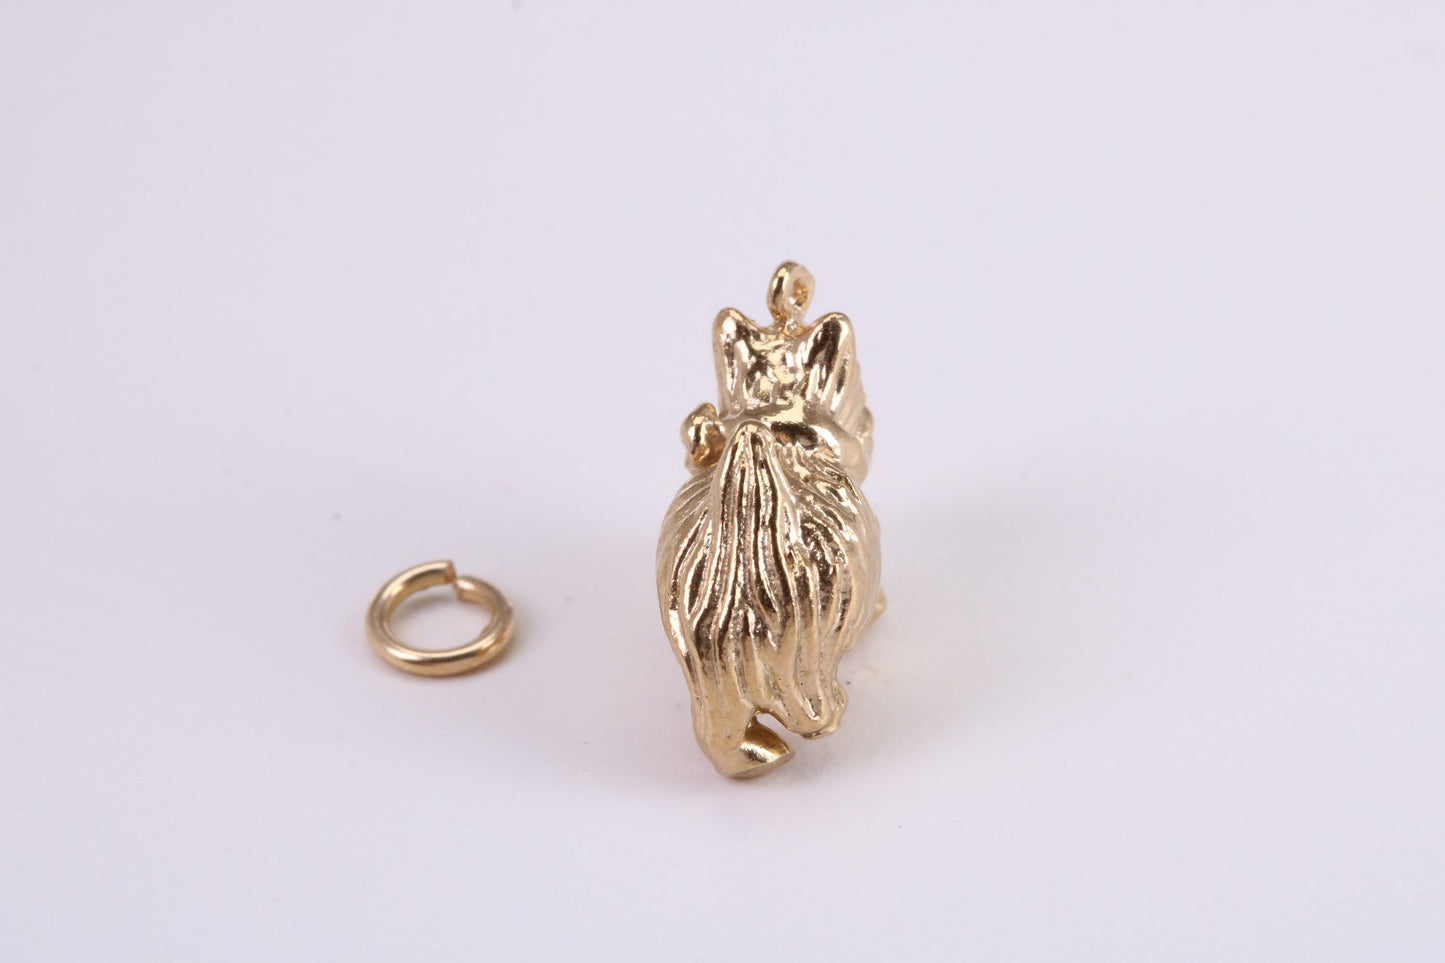 Scottish Terrier Dog Charm, Traditional Charm, Made from Solid Yellow Gold, British Hallmarked, Complete with Attachment Link